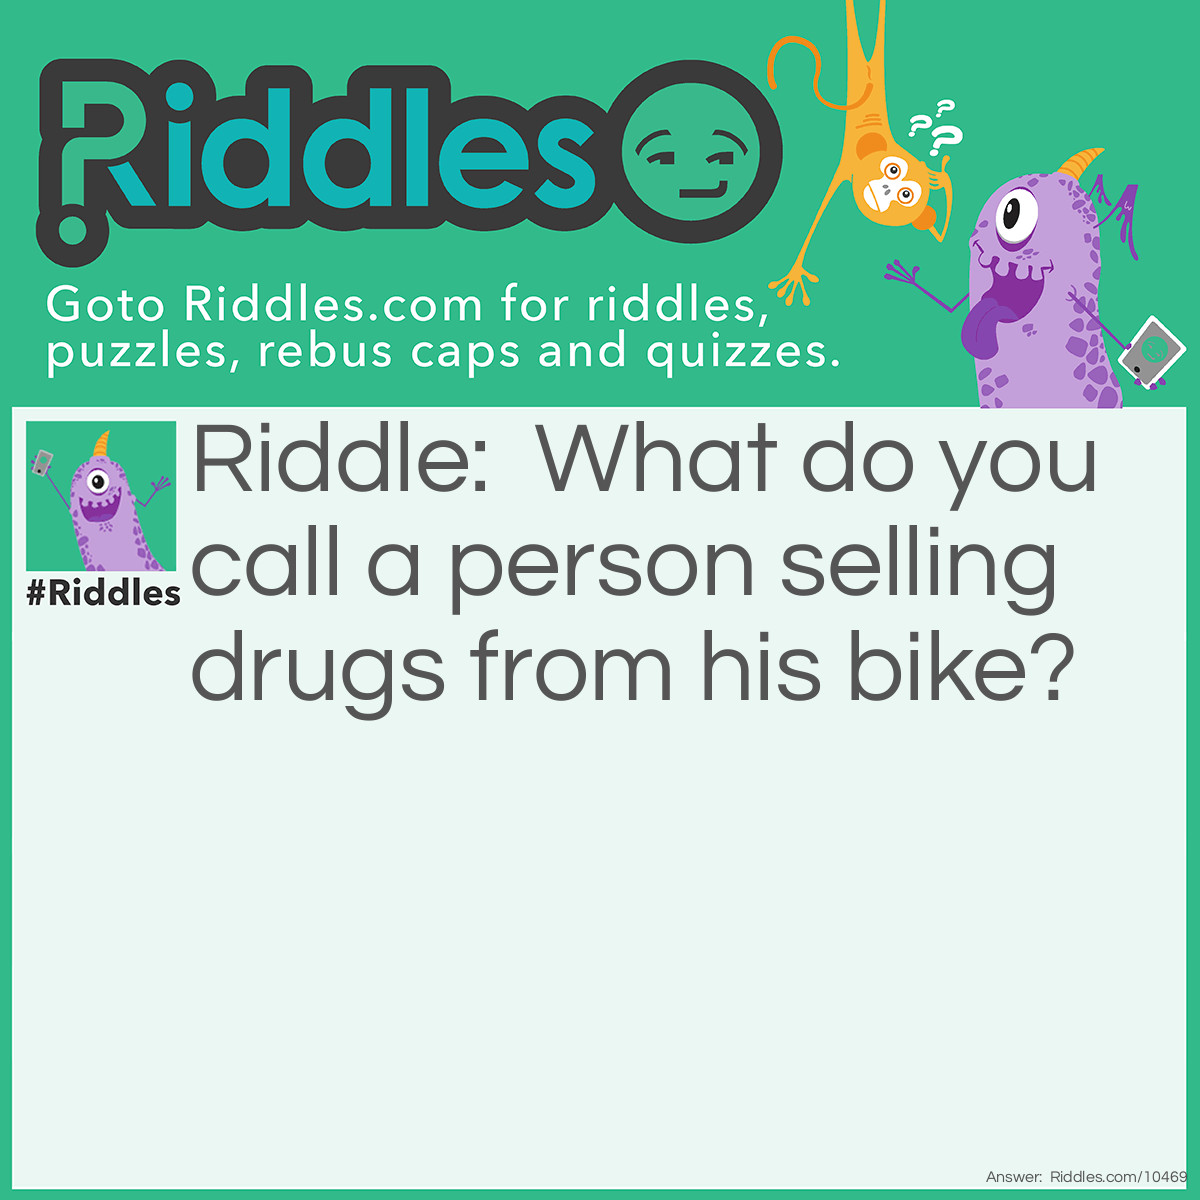 Riddle: What do you call a person selling drugs from his bike? Answer: A dope peddler.